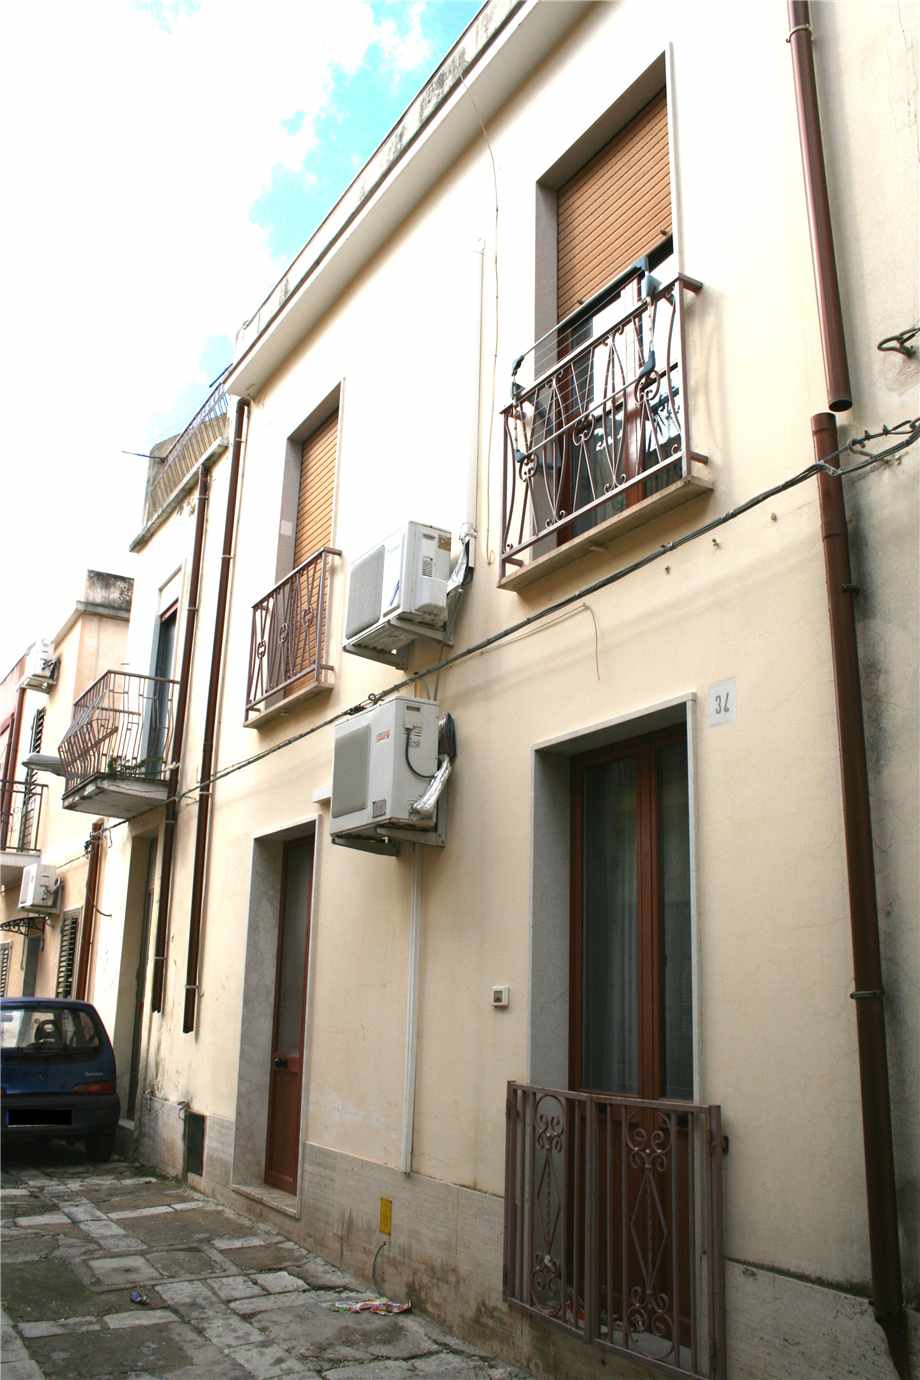 For sale Detached house Noto  #16C n.2